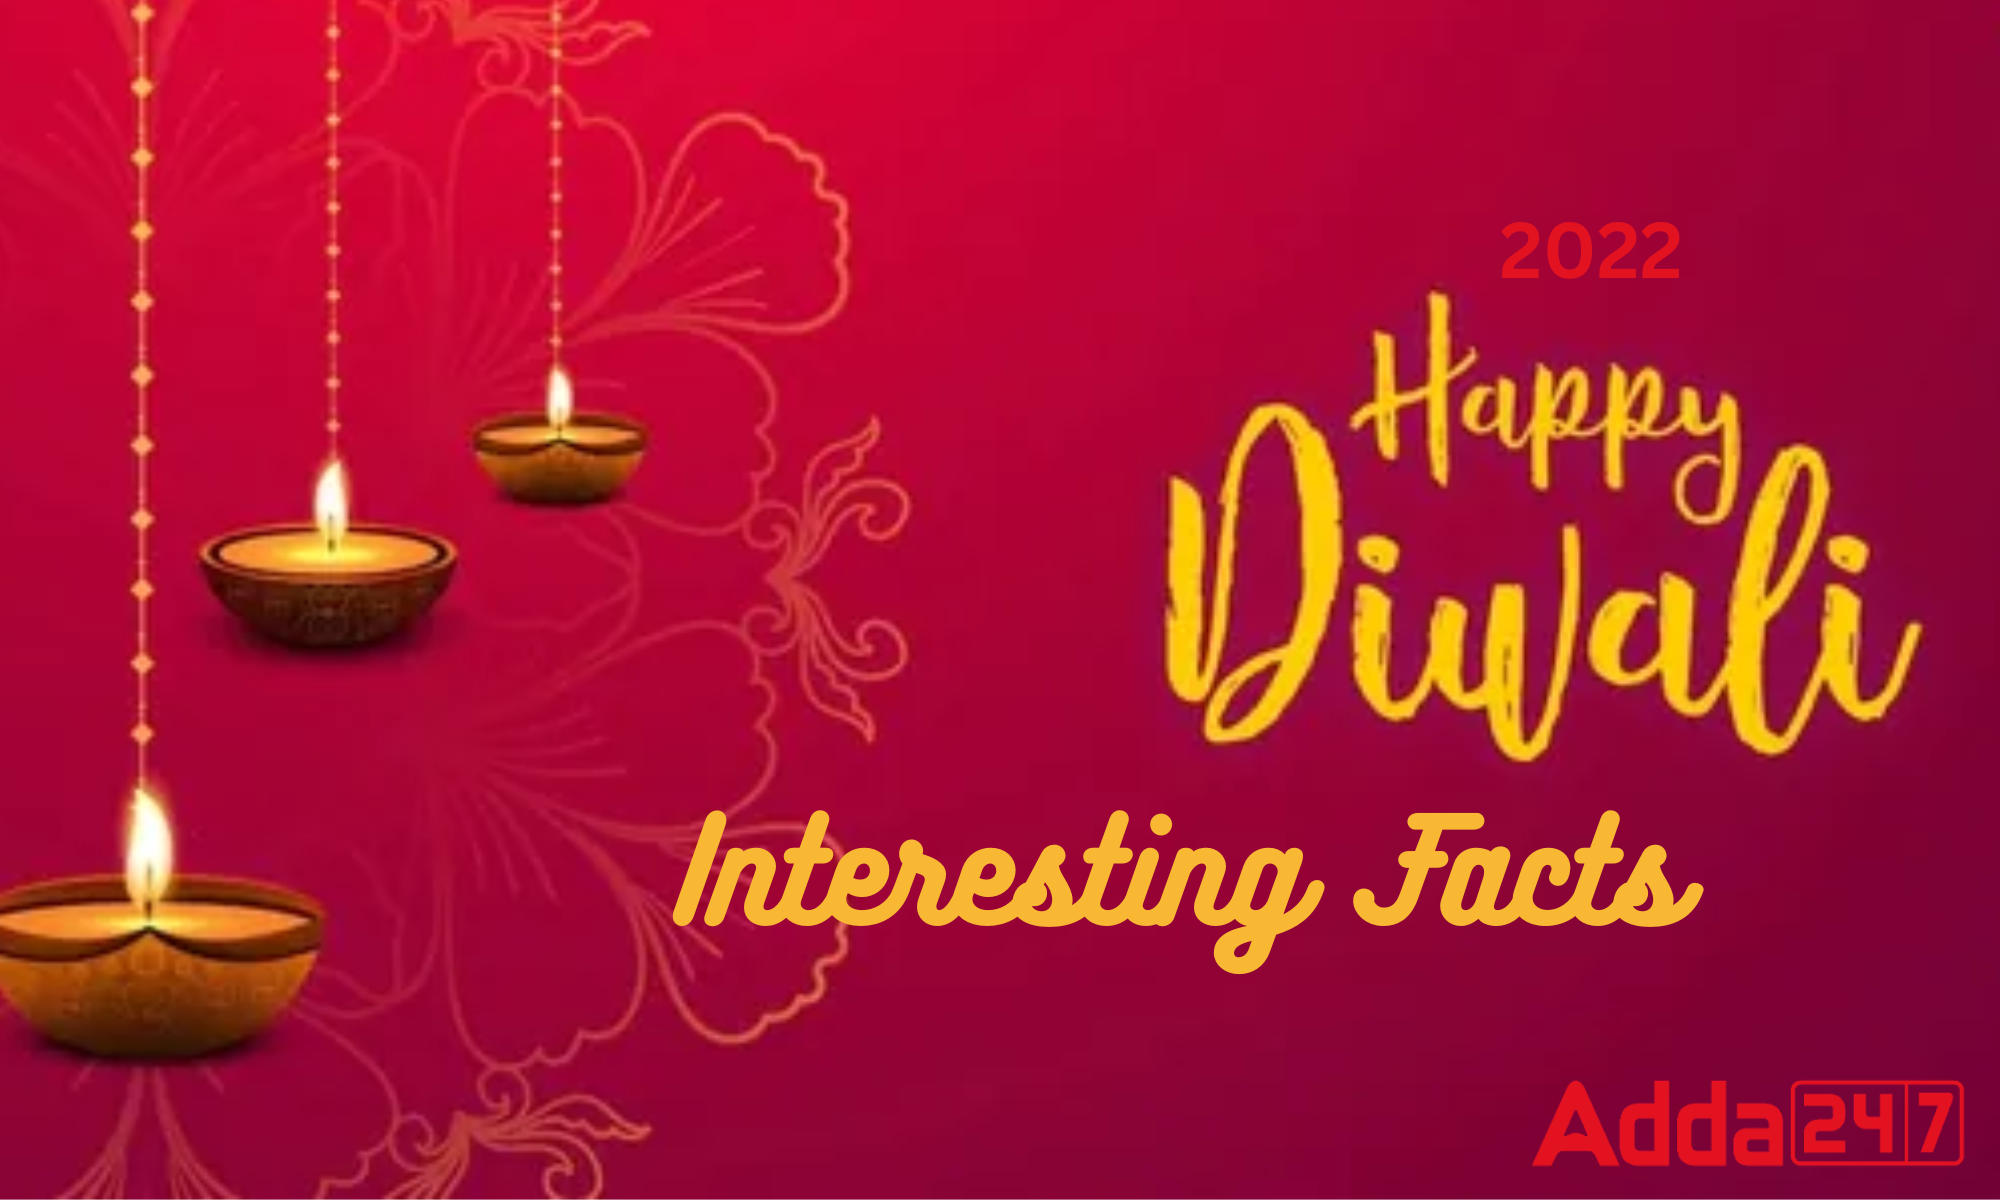 Important Happy Diwali 2022 Facts